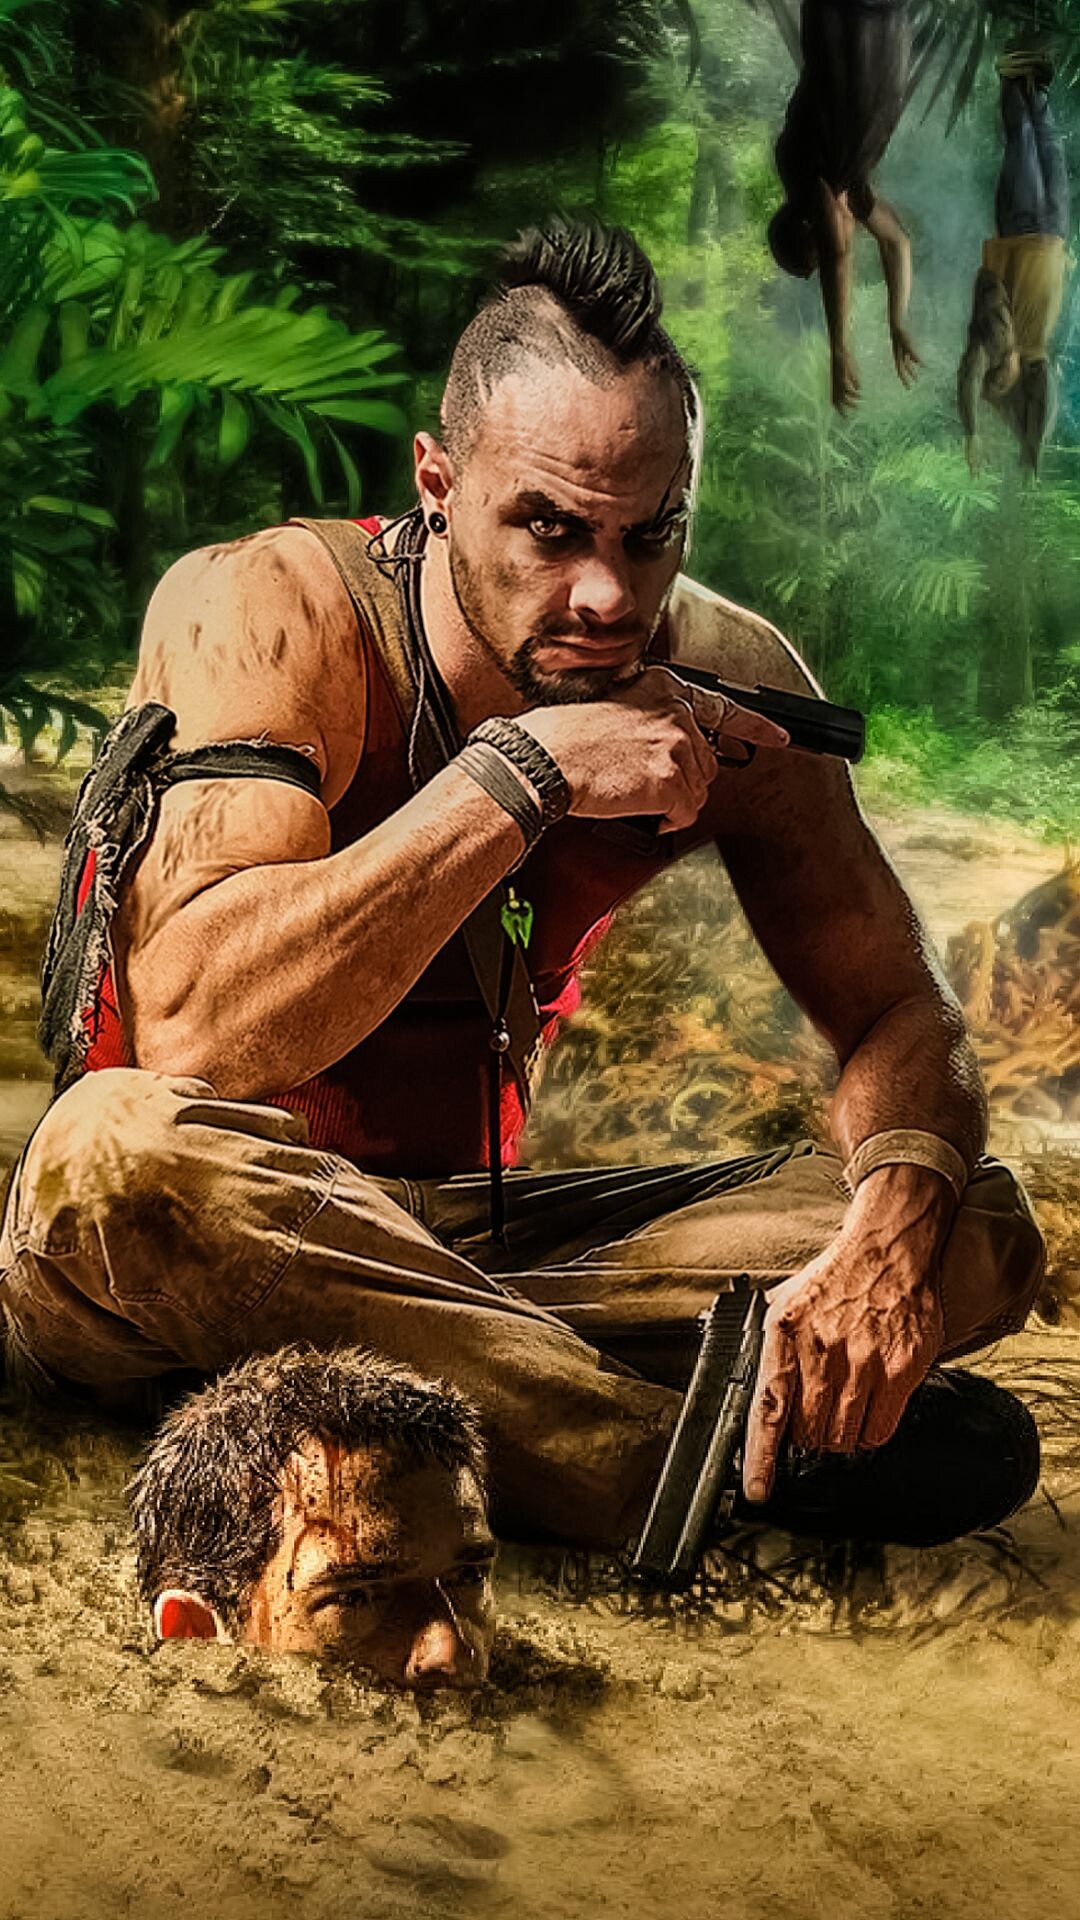 Far Cry 3: Vaas Montenegro, One of the most recognizable villains in video game history. 1080x1920 Full HD Wallpaper.